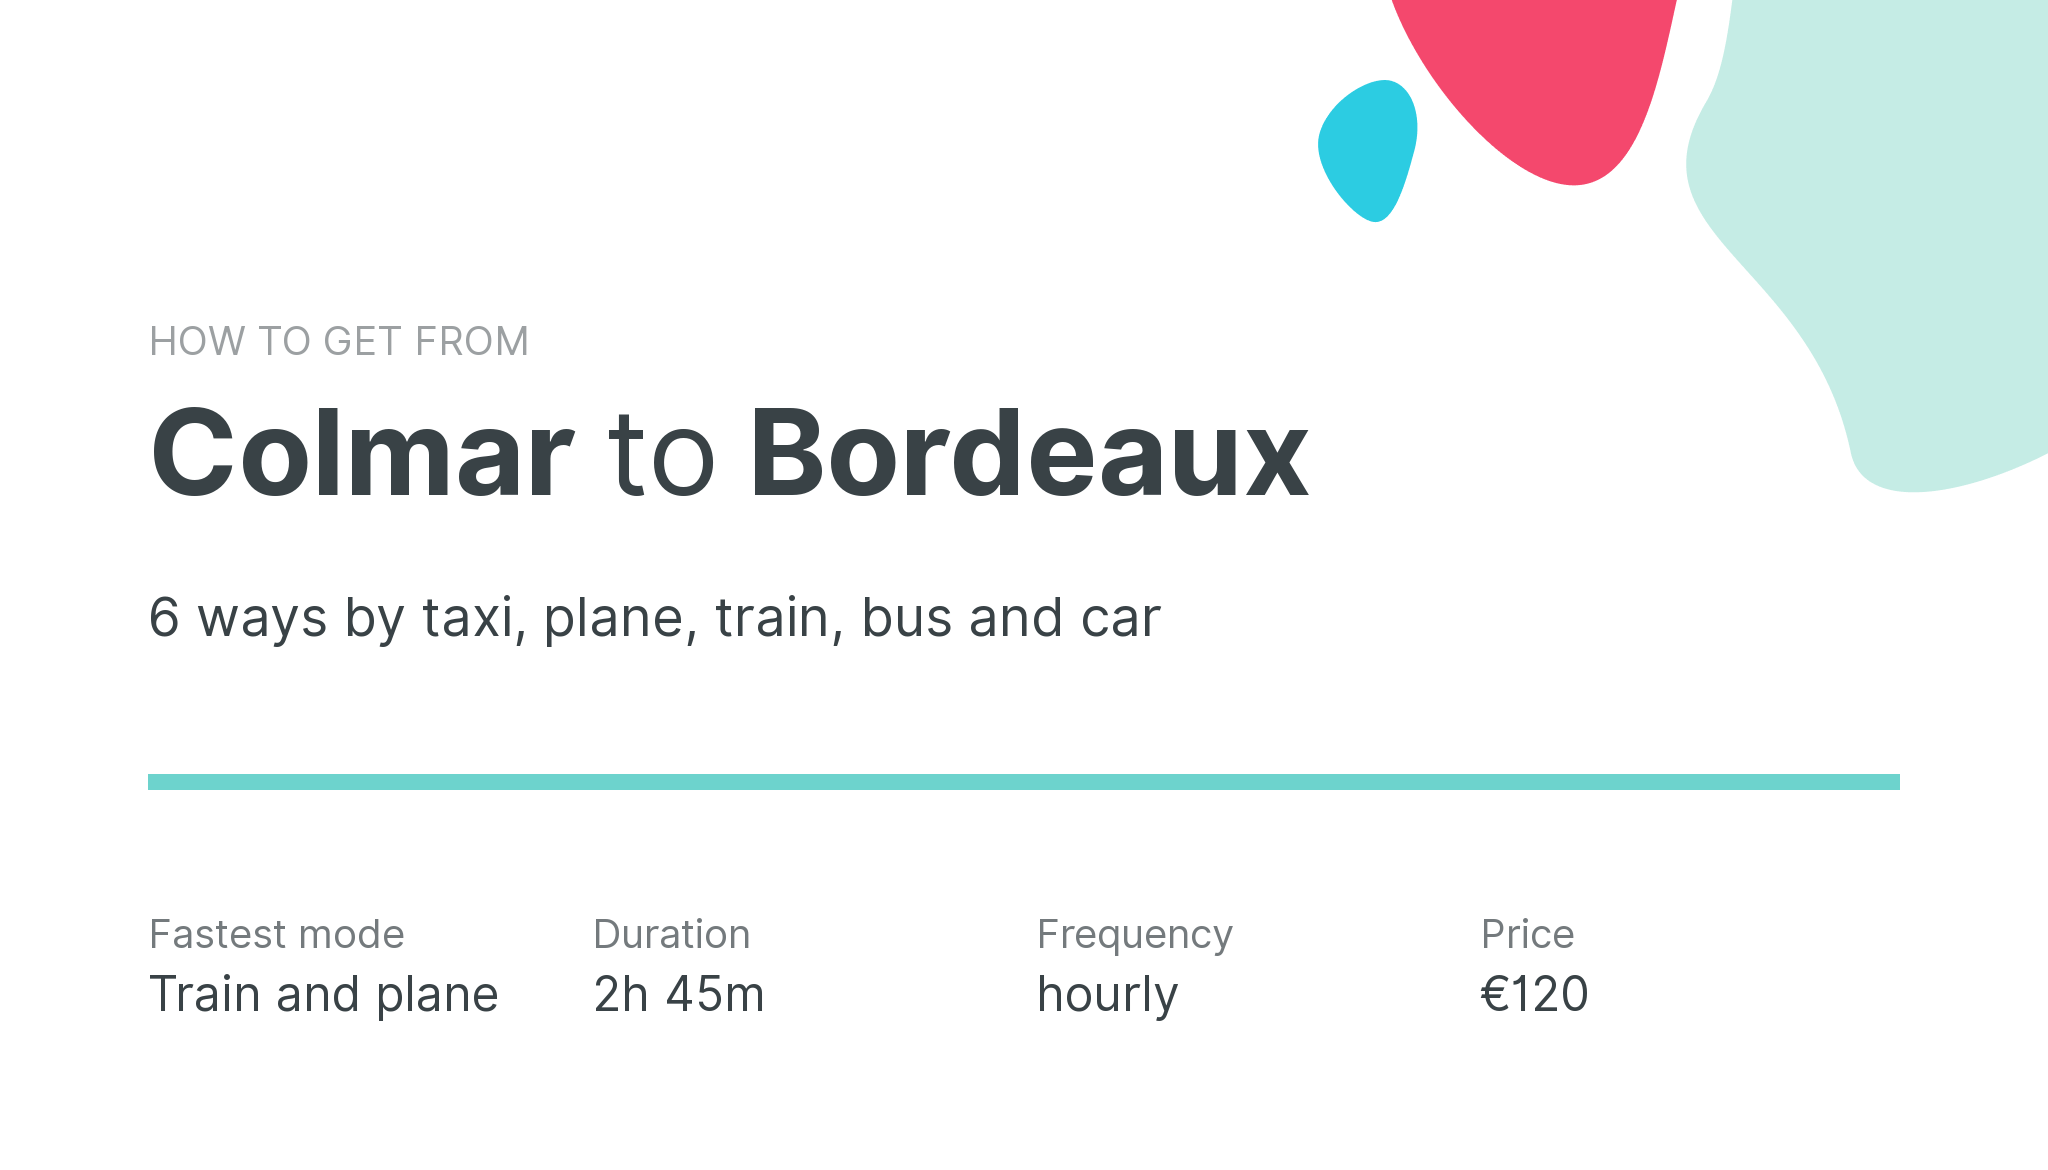 How do I get from Colmar to Bordeaux